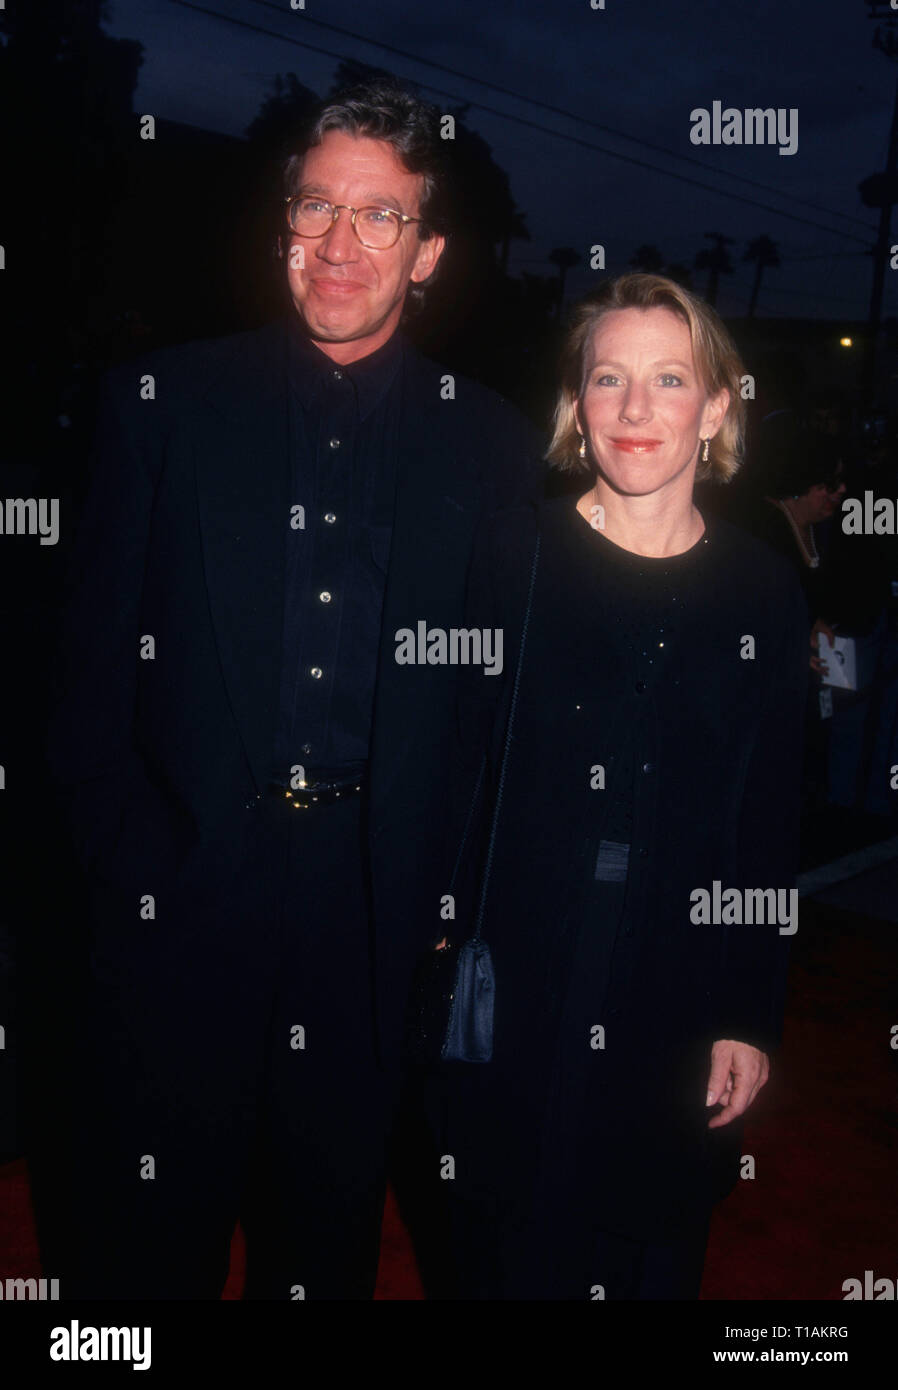 LOS ANGELES, CA - MARCH 6: Actor Tim Allen and wife Laura Deibel attend the Eighth Annual American Comedy Awards on March 6, 1994 at the Shrine Auditorium in Los Angeles, California. Photo by Barry King/Alamy Stock Photo Stock Photo